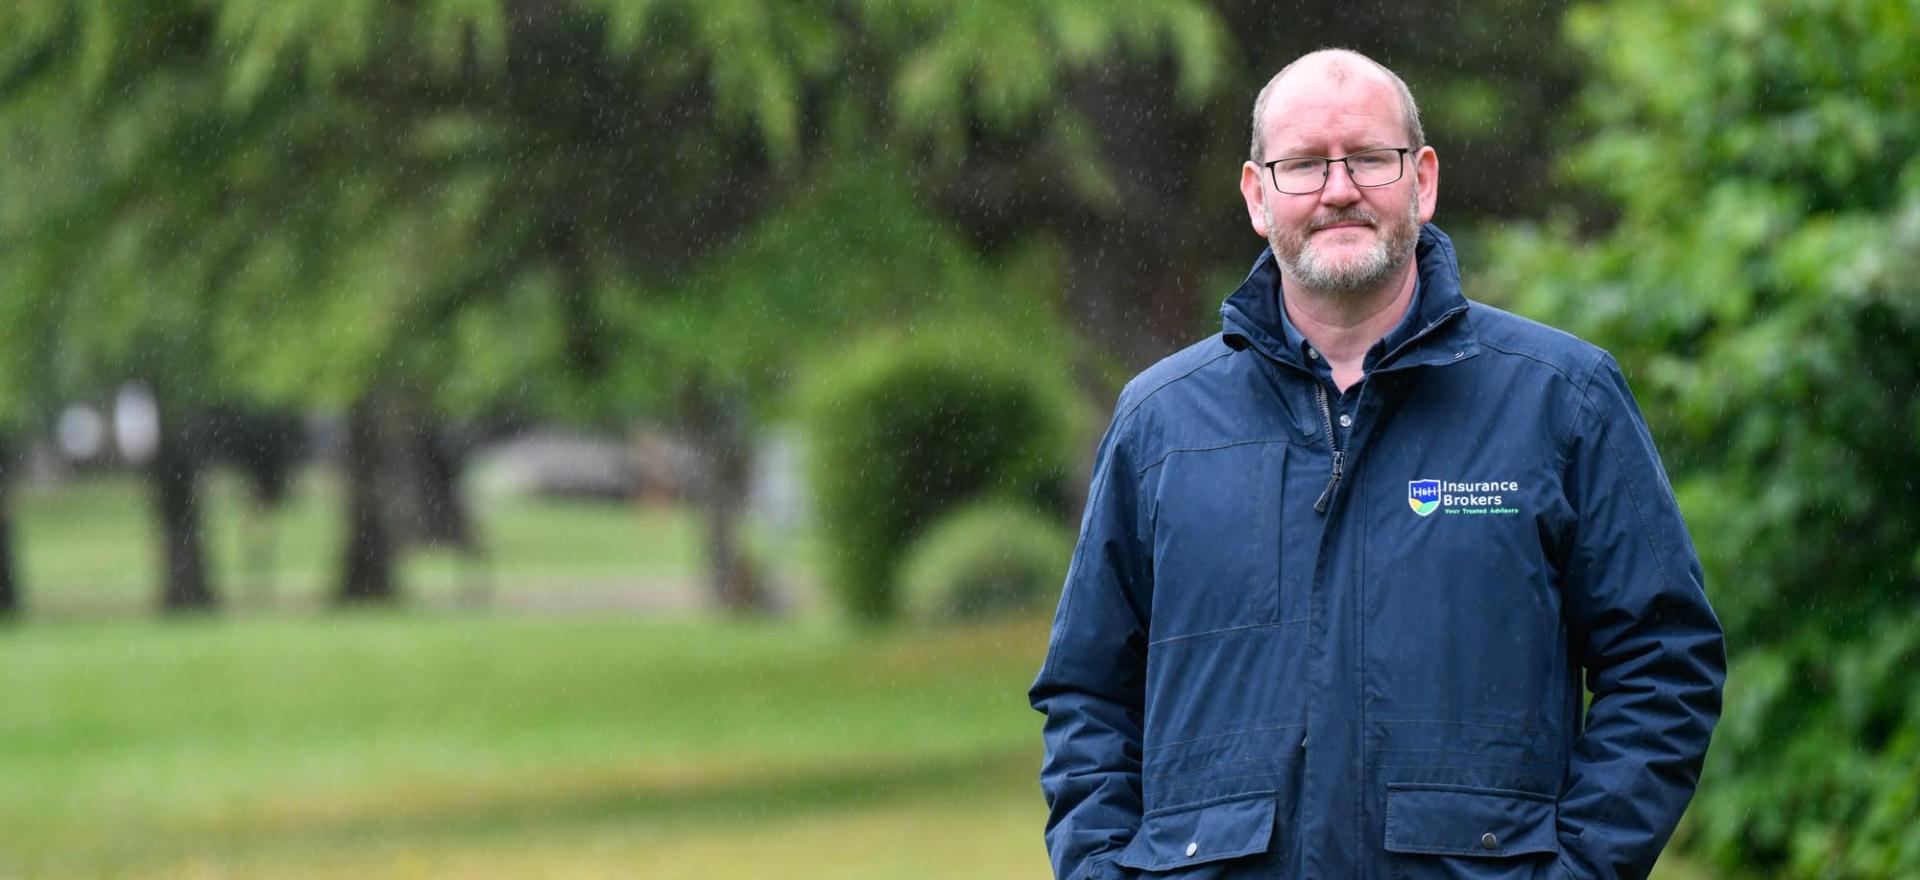 Stuart Torrance, Claims Manager at H&H Insurance Brokers standing in the rain, with a background of grass and hedges